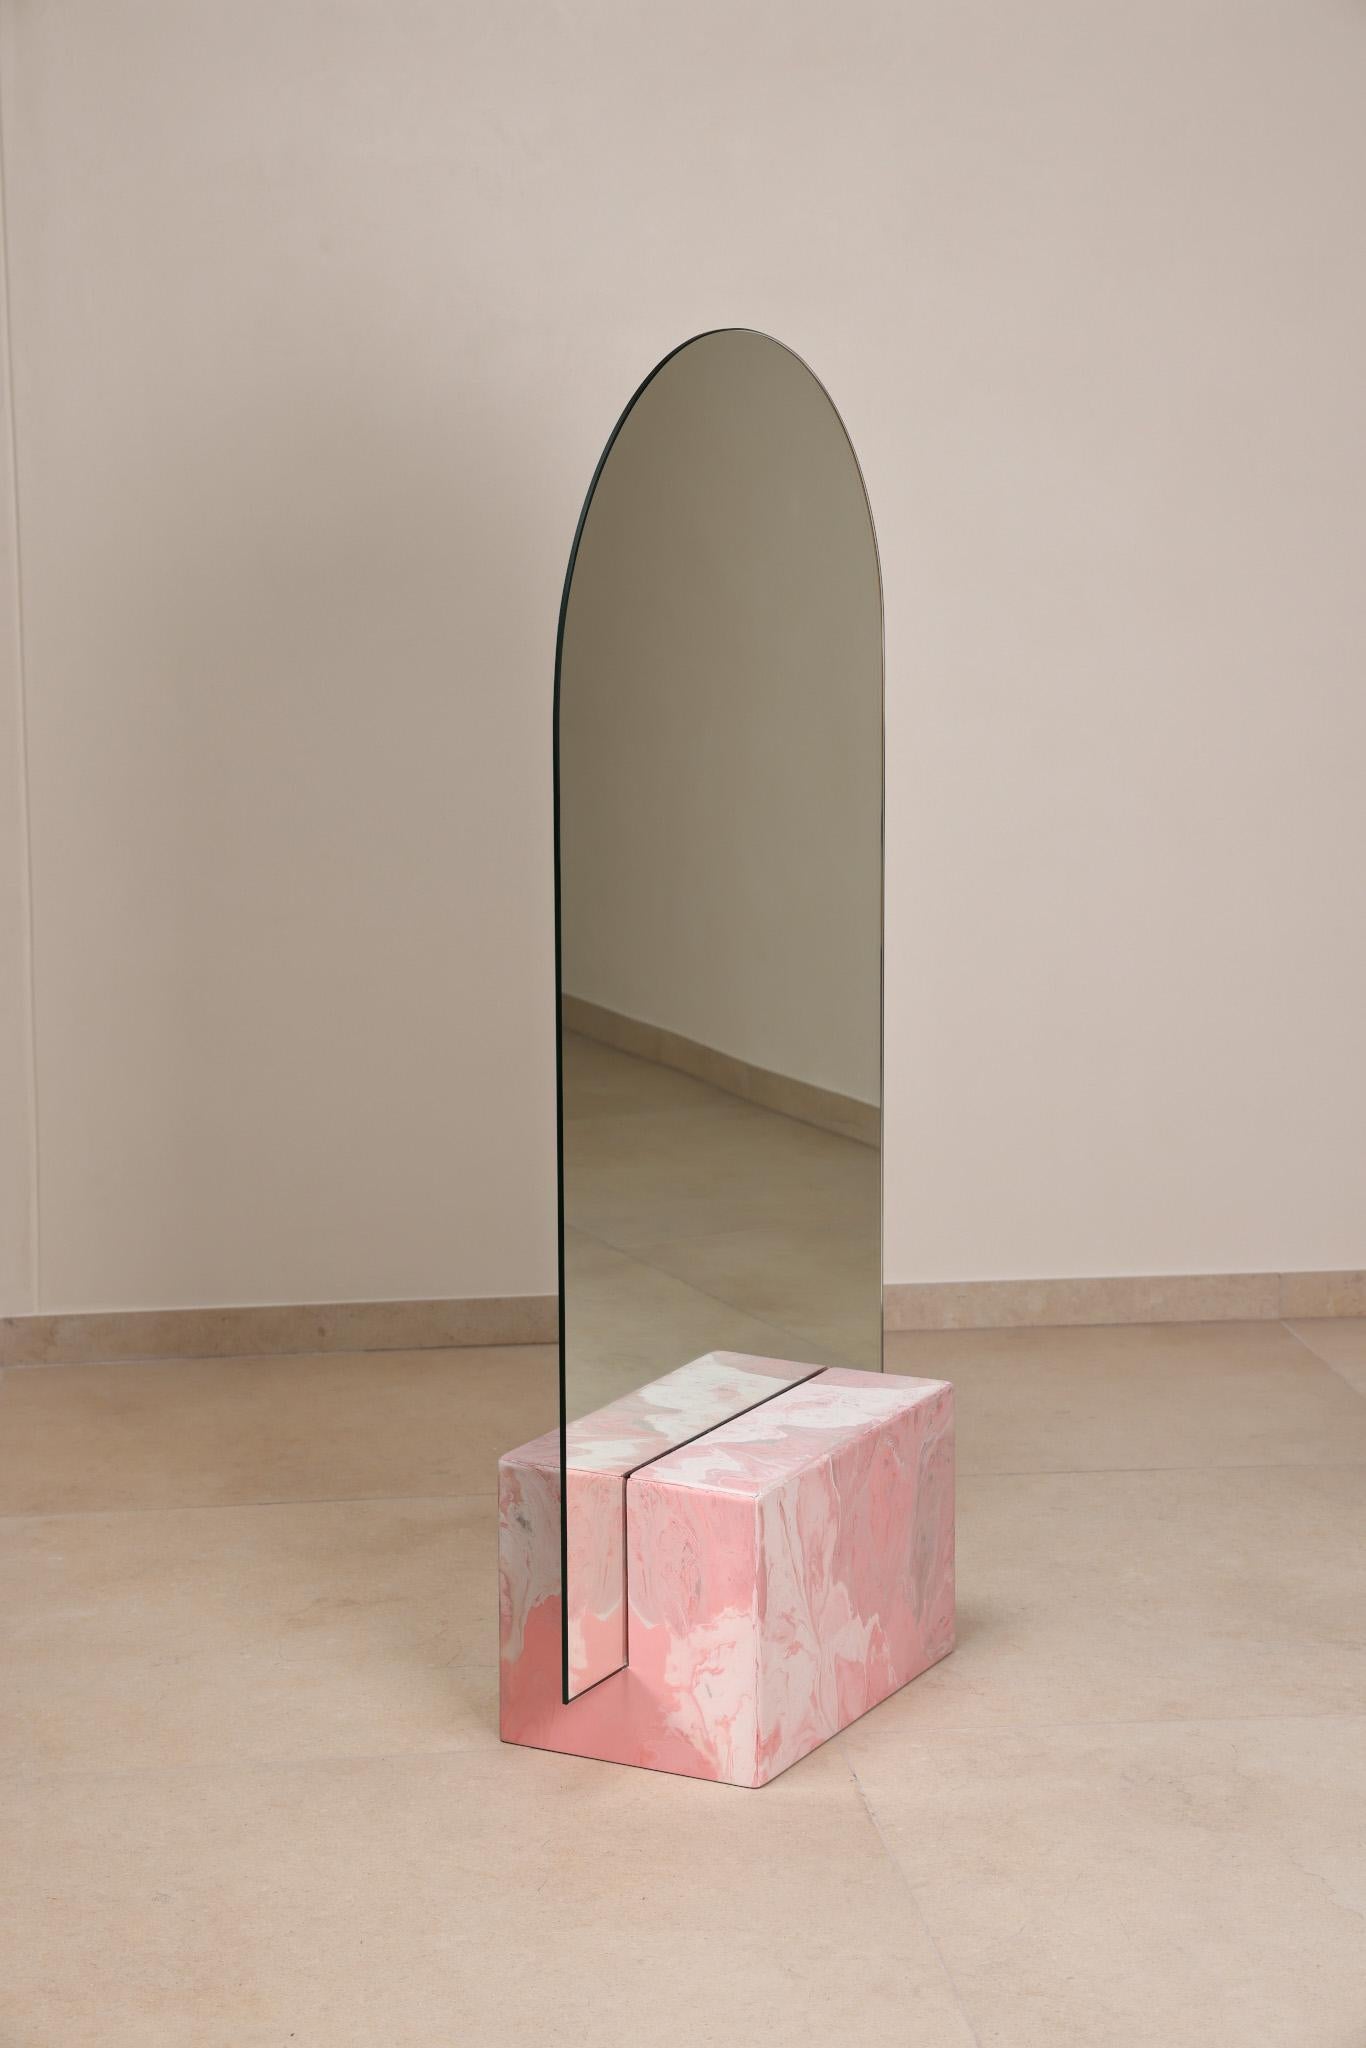 Contemporary Pink Console Mirror Hand-Crafted from 100% Recycled Plastic by Anqa Studios
With its stone-like bottom and the fragile seeming top part silhouette, the ANQA Moonrise mirror is a modern confluence of both art and function. This